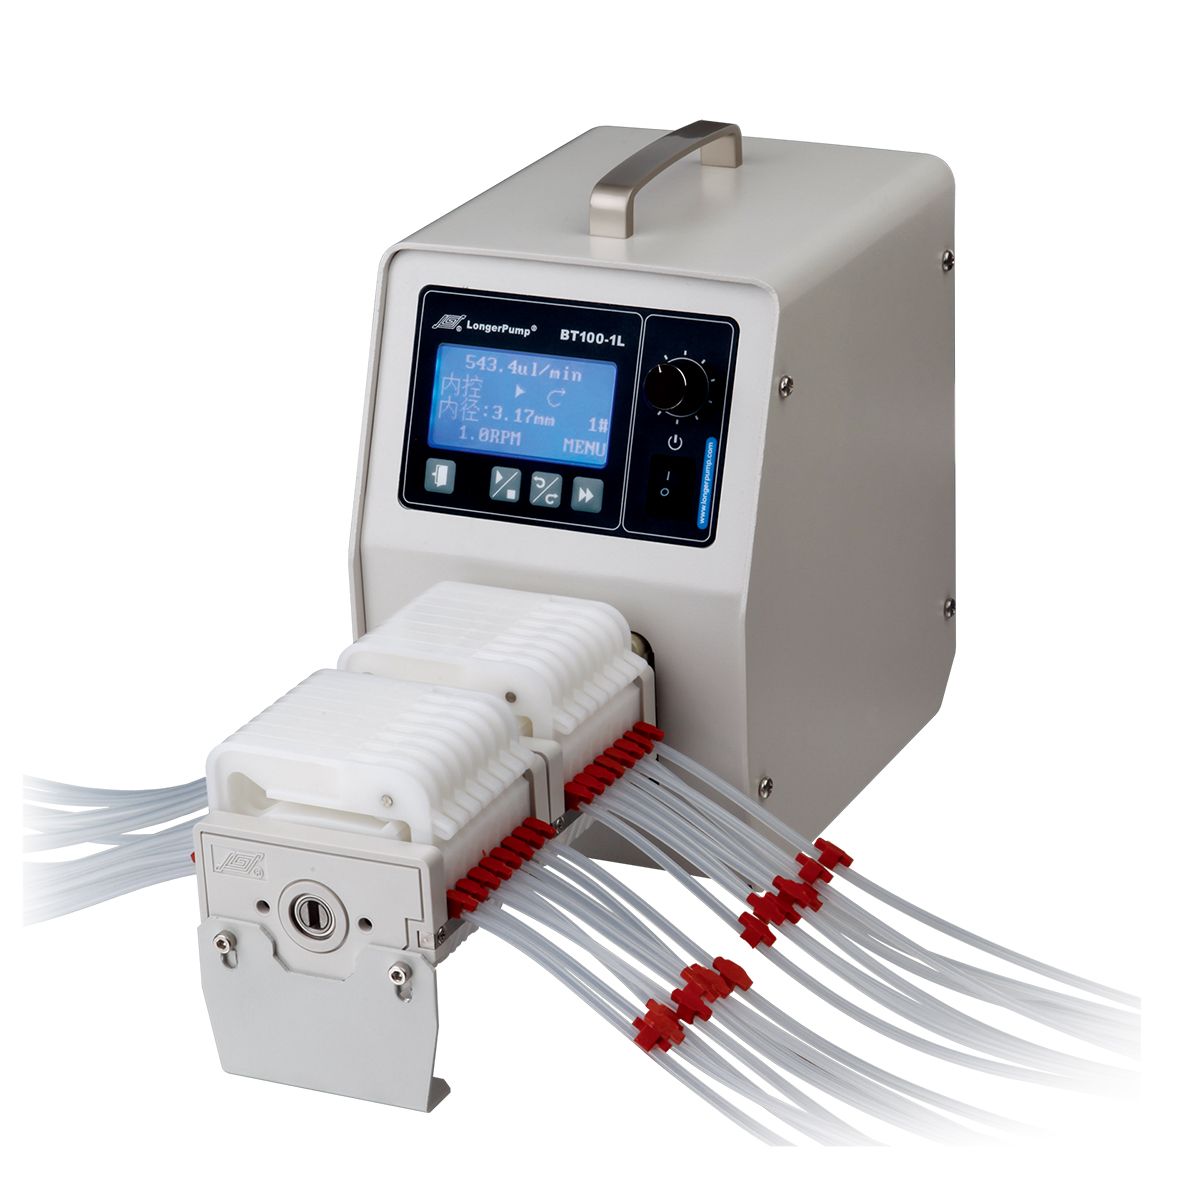 Multichannel laboratory peristaltic pump with up to 24 channels and 10 rollers